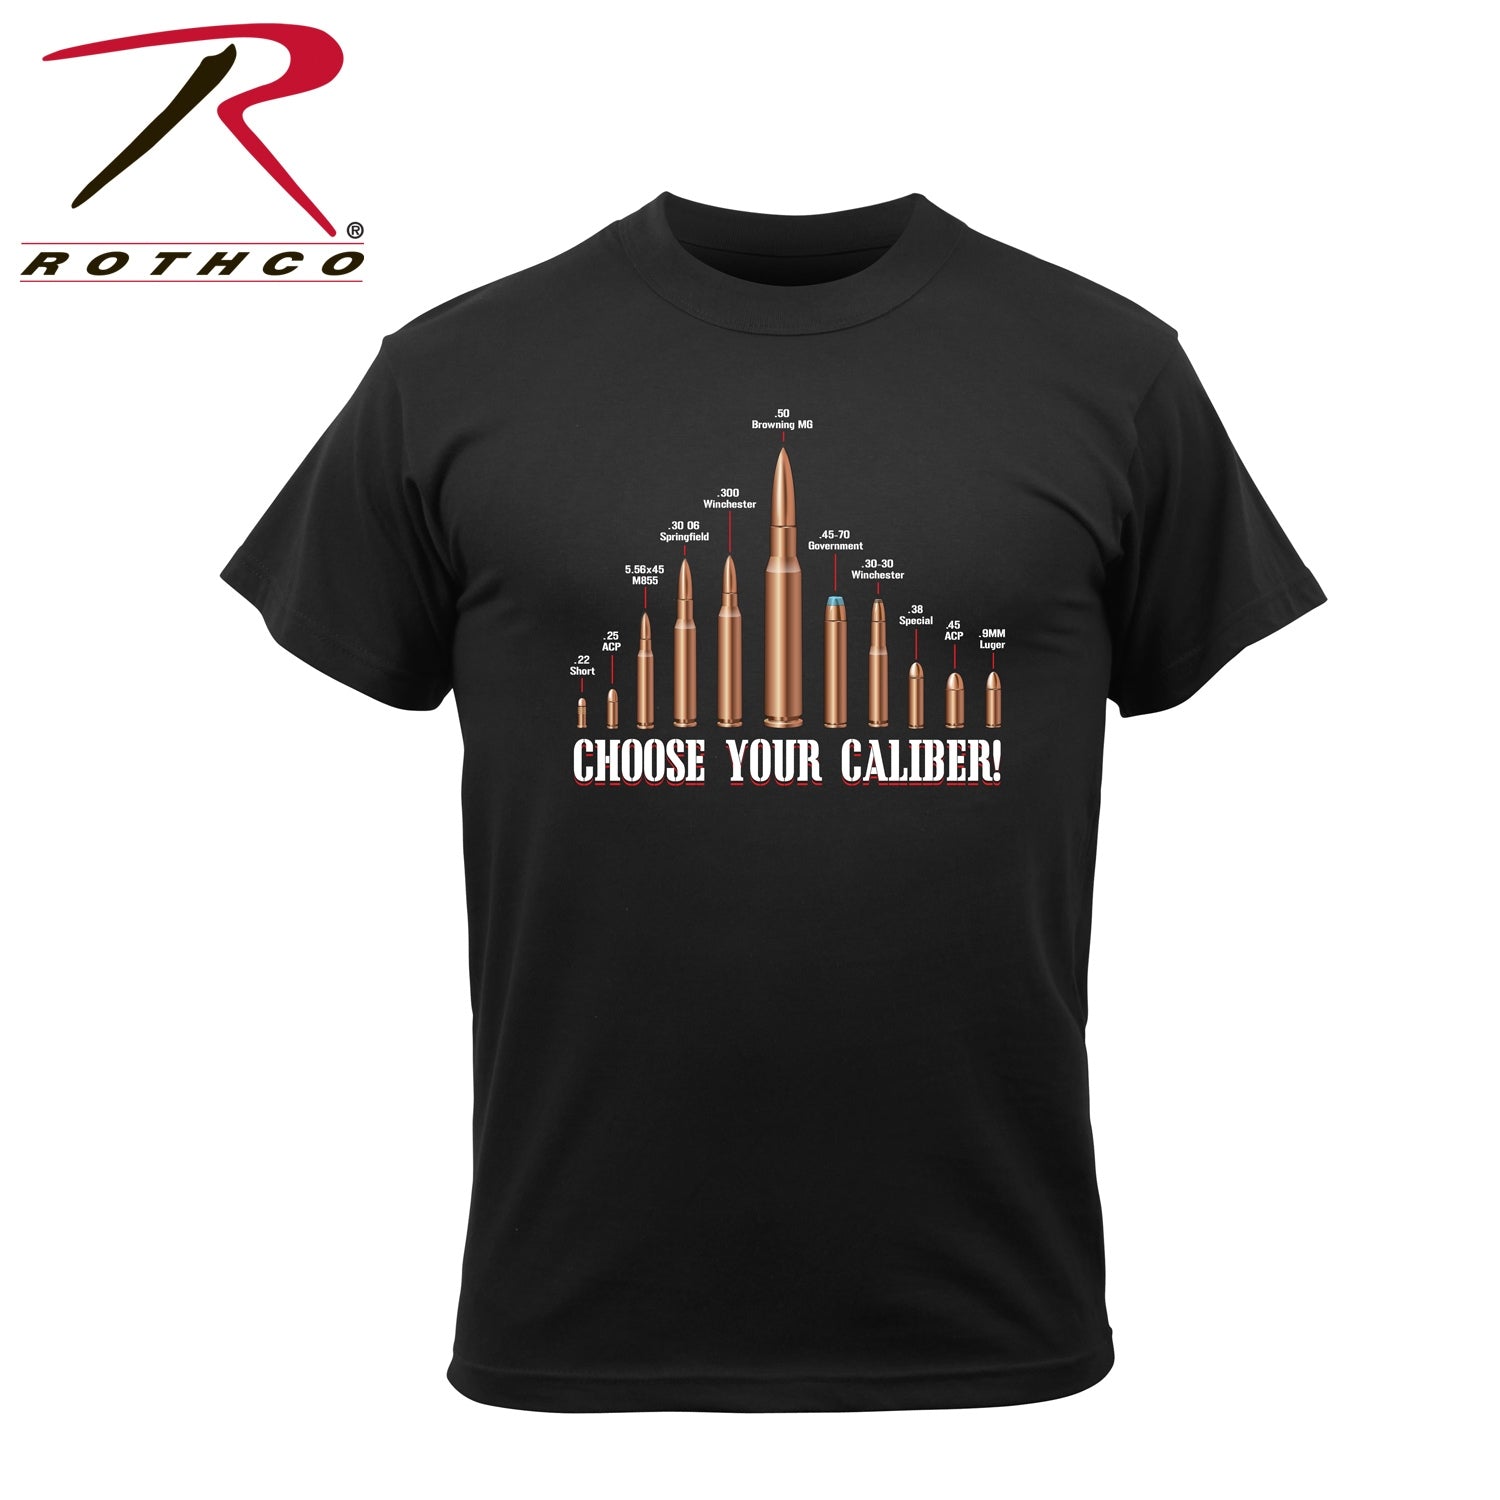 Rothco Vintage 'Choose Your Caliber' T-Shirt | All Security Equipment